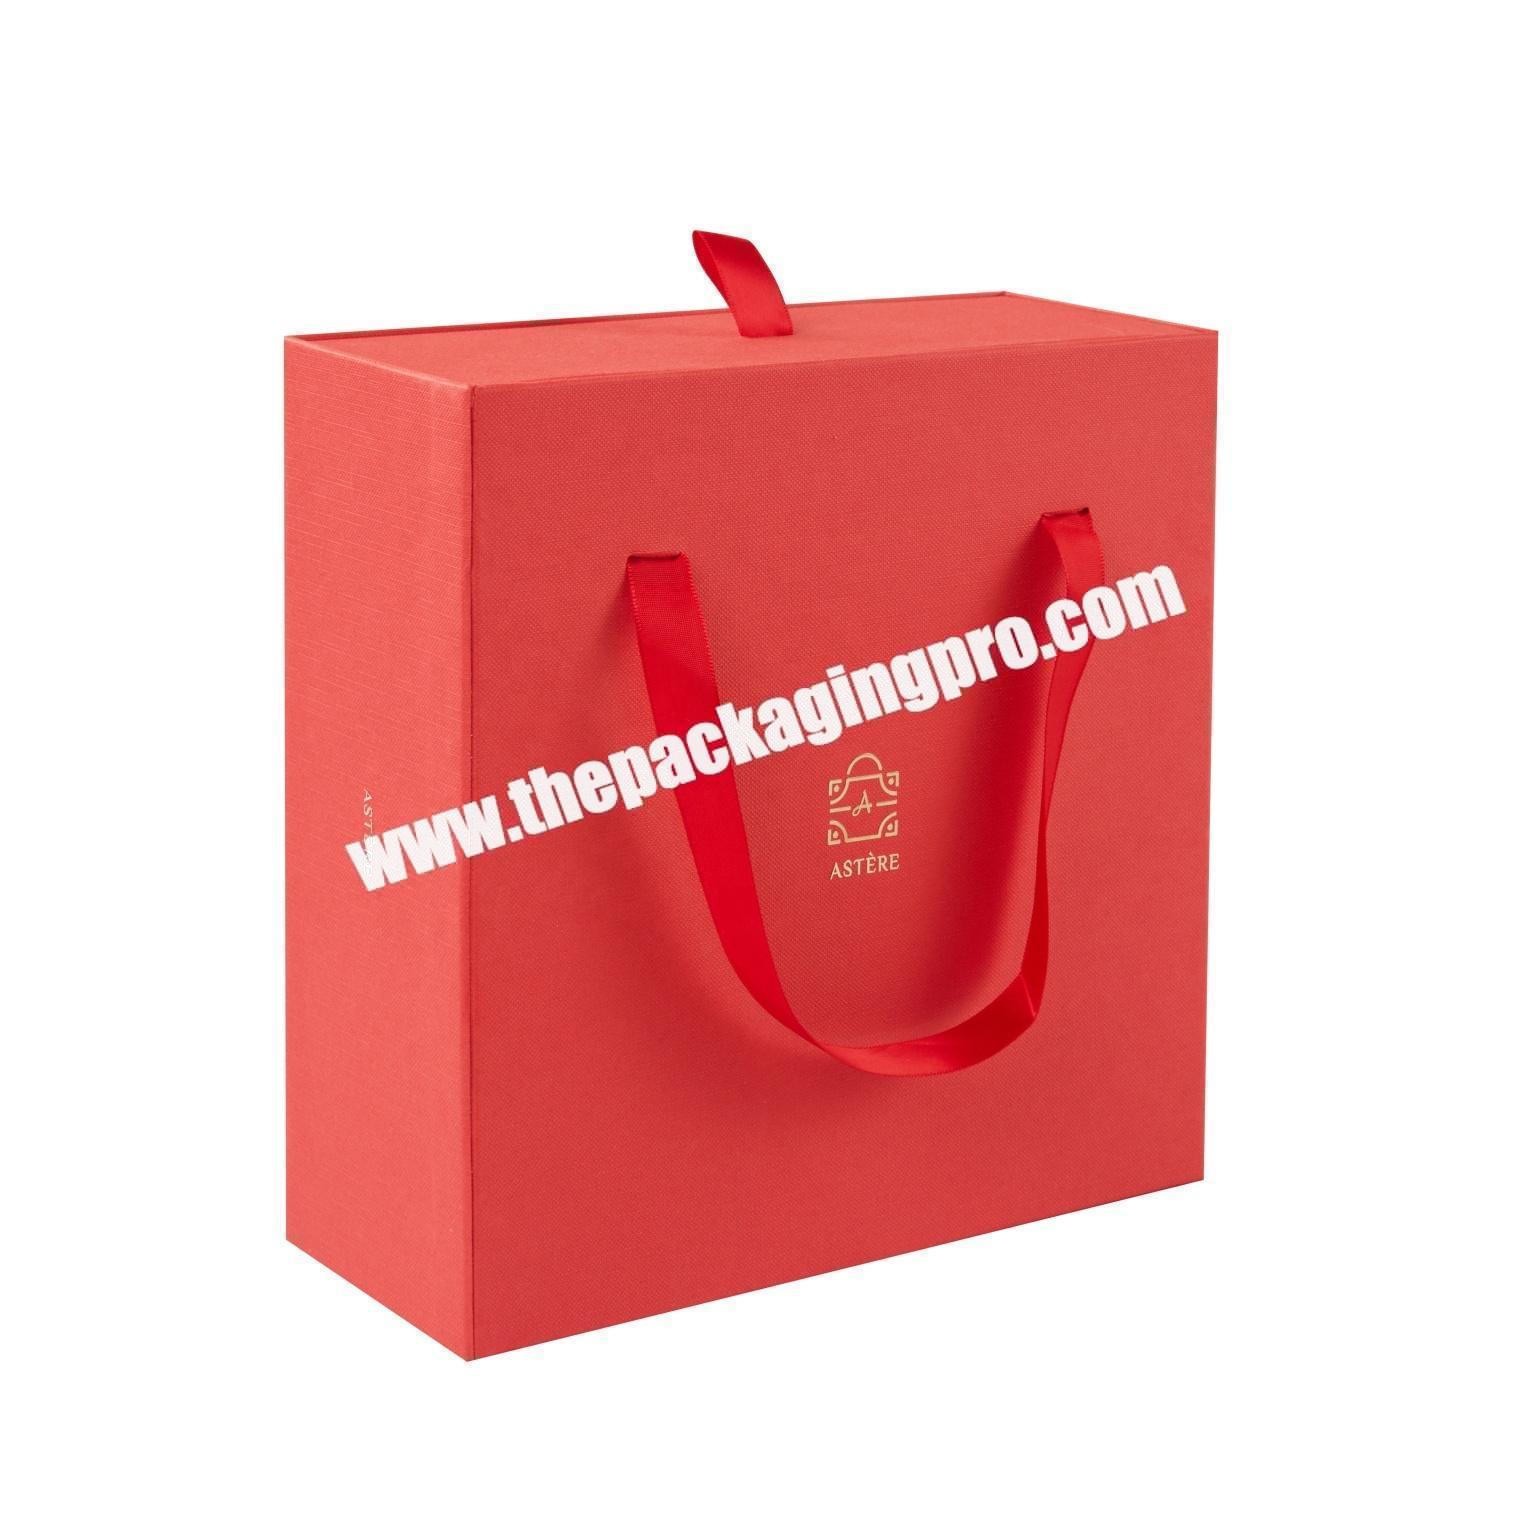 Attractive and pure bright red gift perfume display box